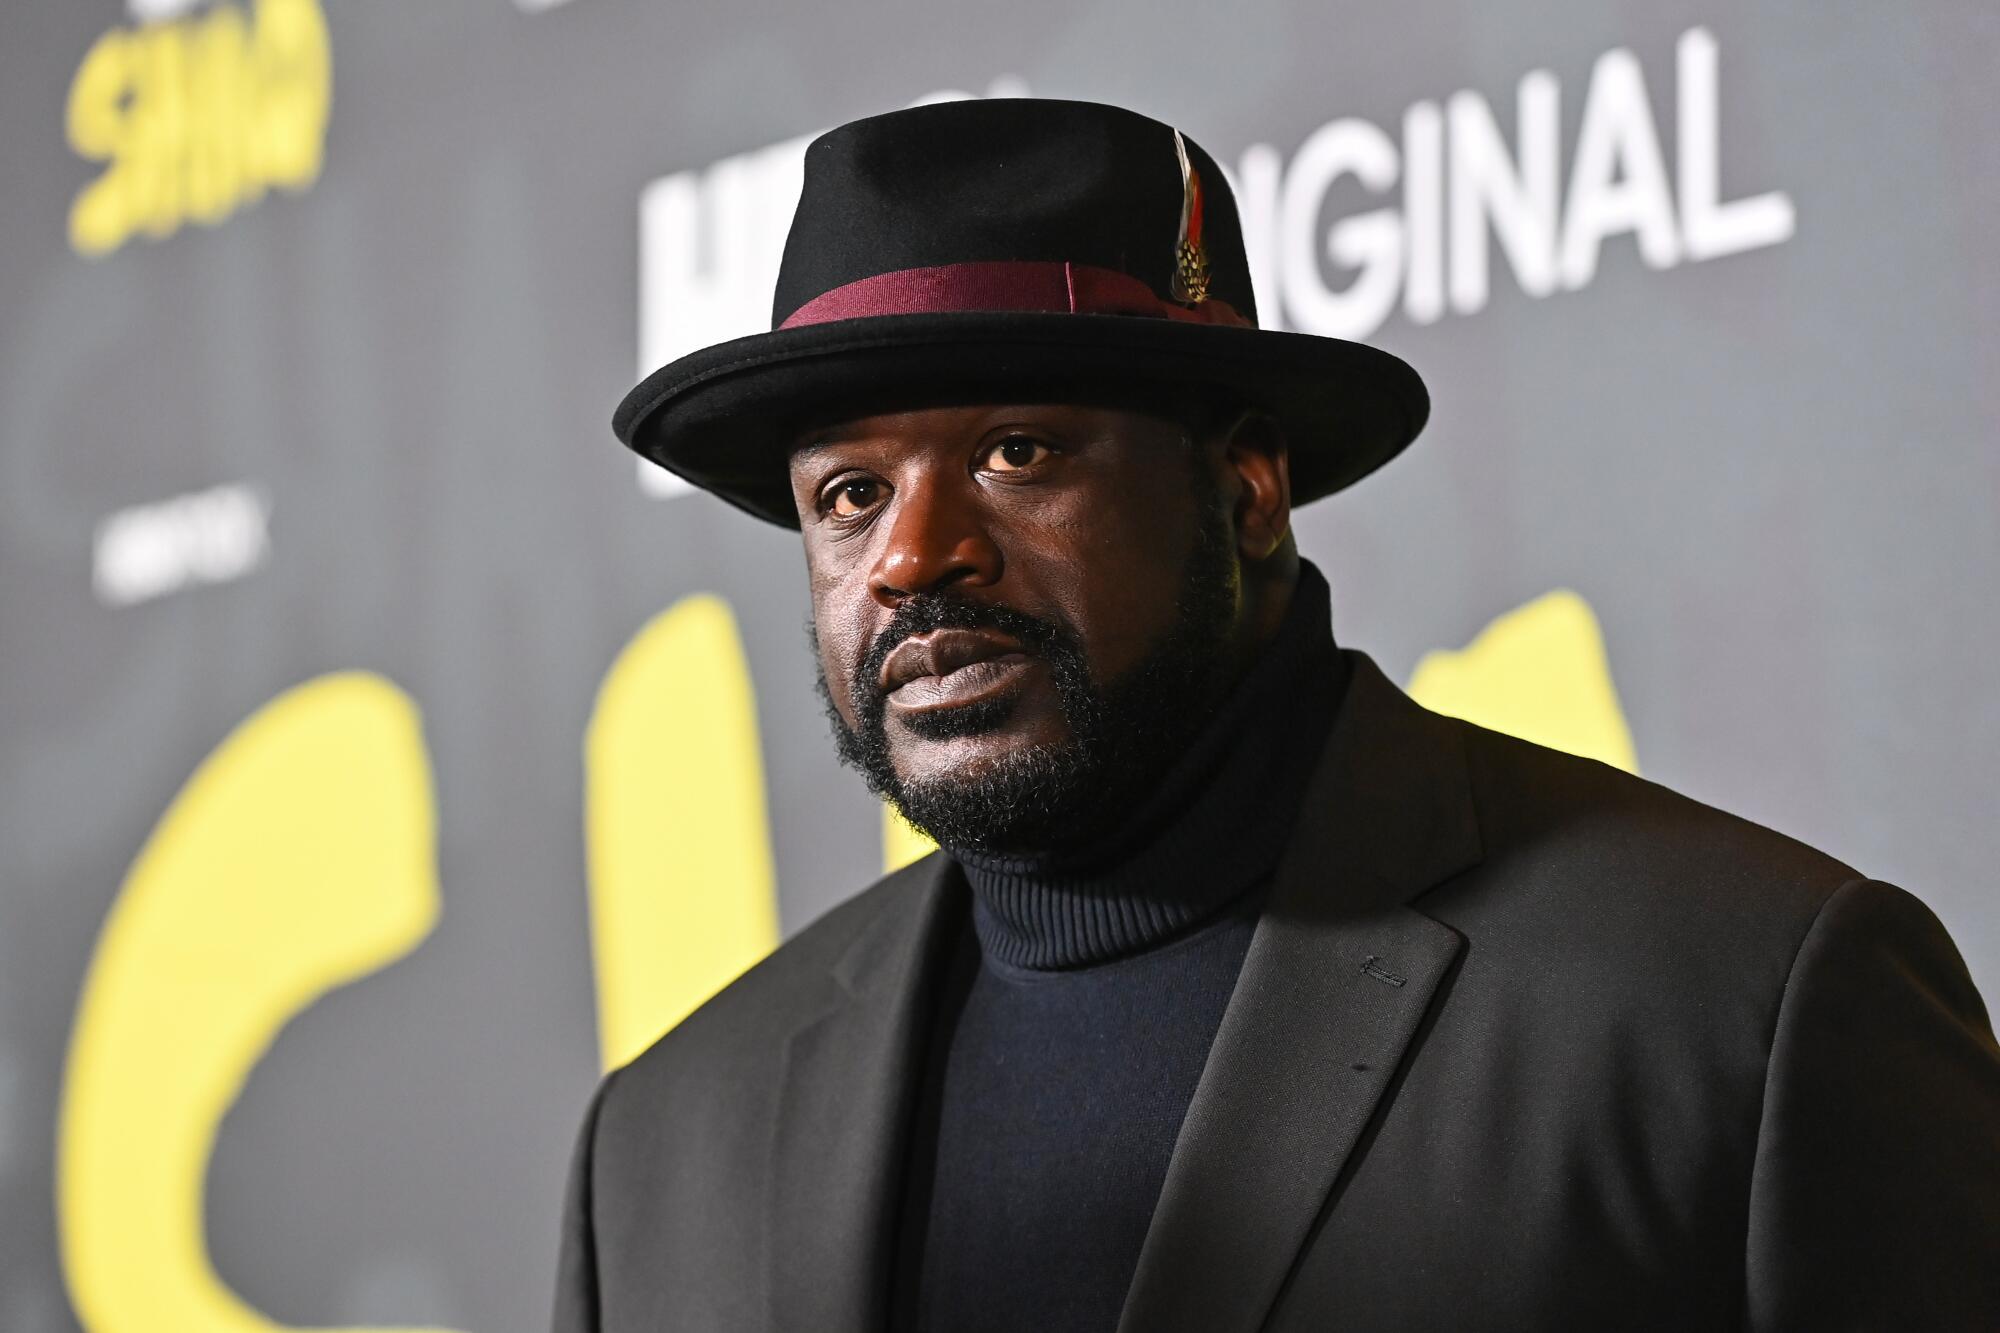 Shaquille O'Neal attends the HBO Premiere for the four-part documentary "Shaq" at the Illuminarium in Atlanta.